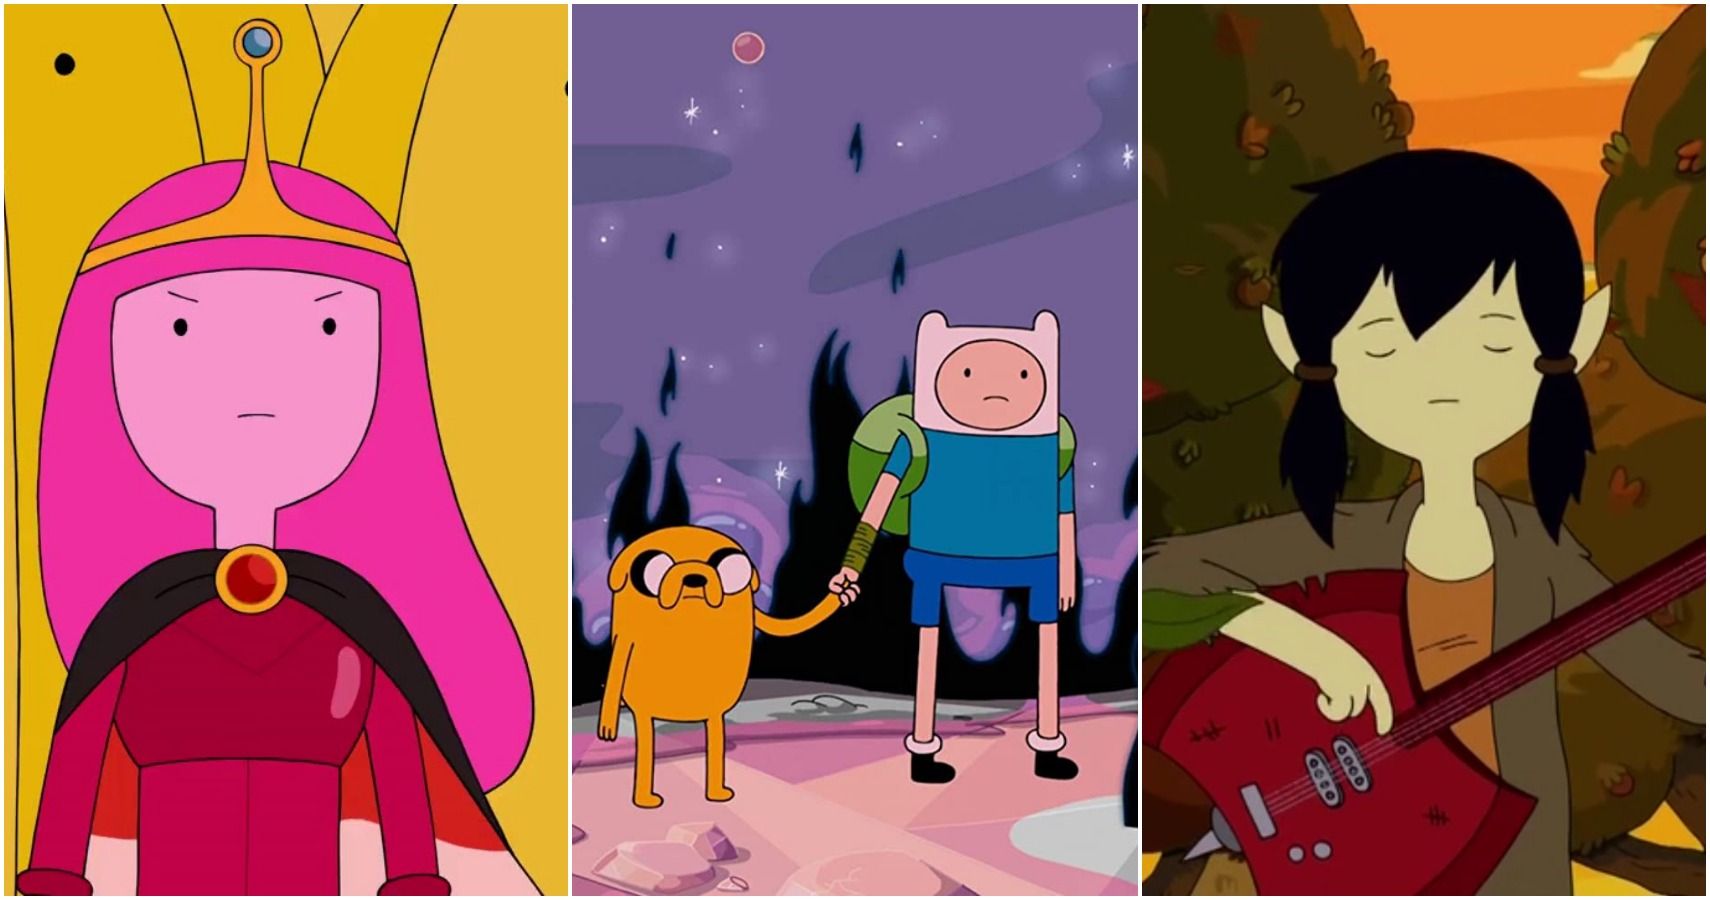 Adventure Time The Best Episode From Each Season Ranked By IMDb Score